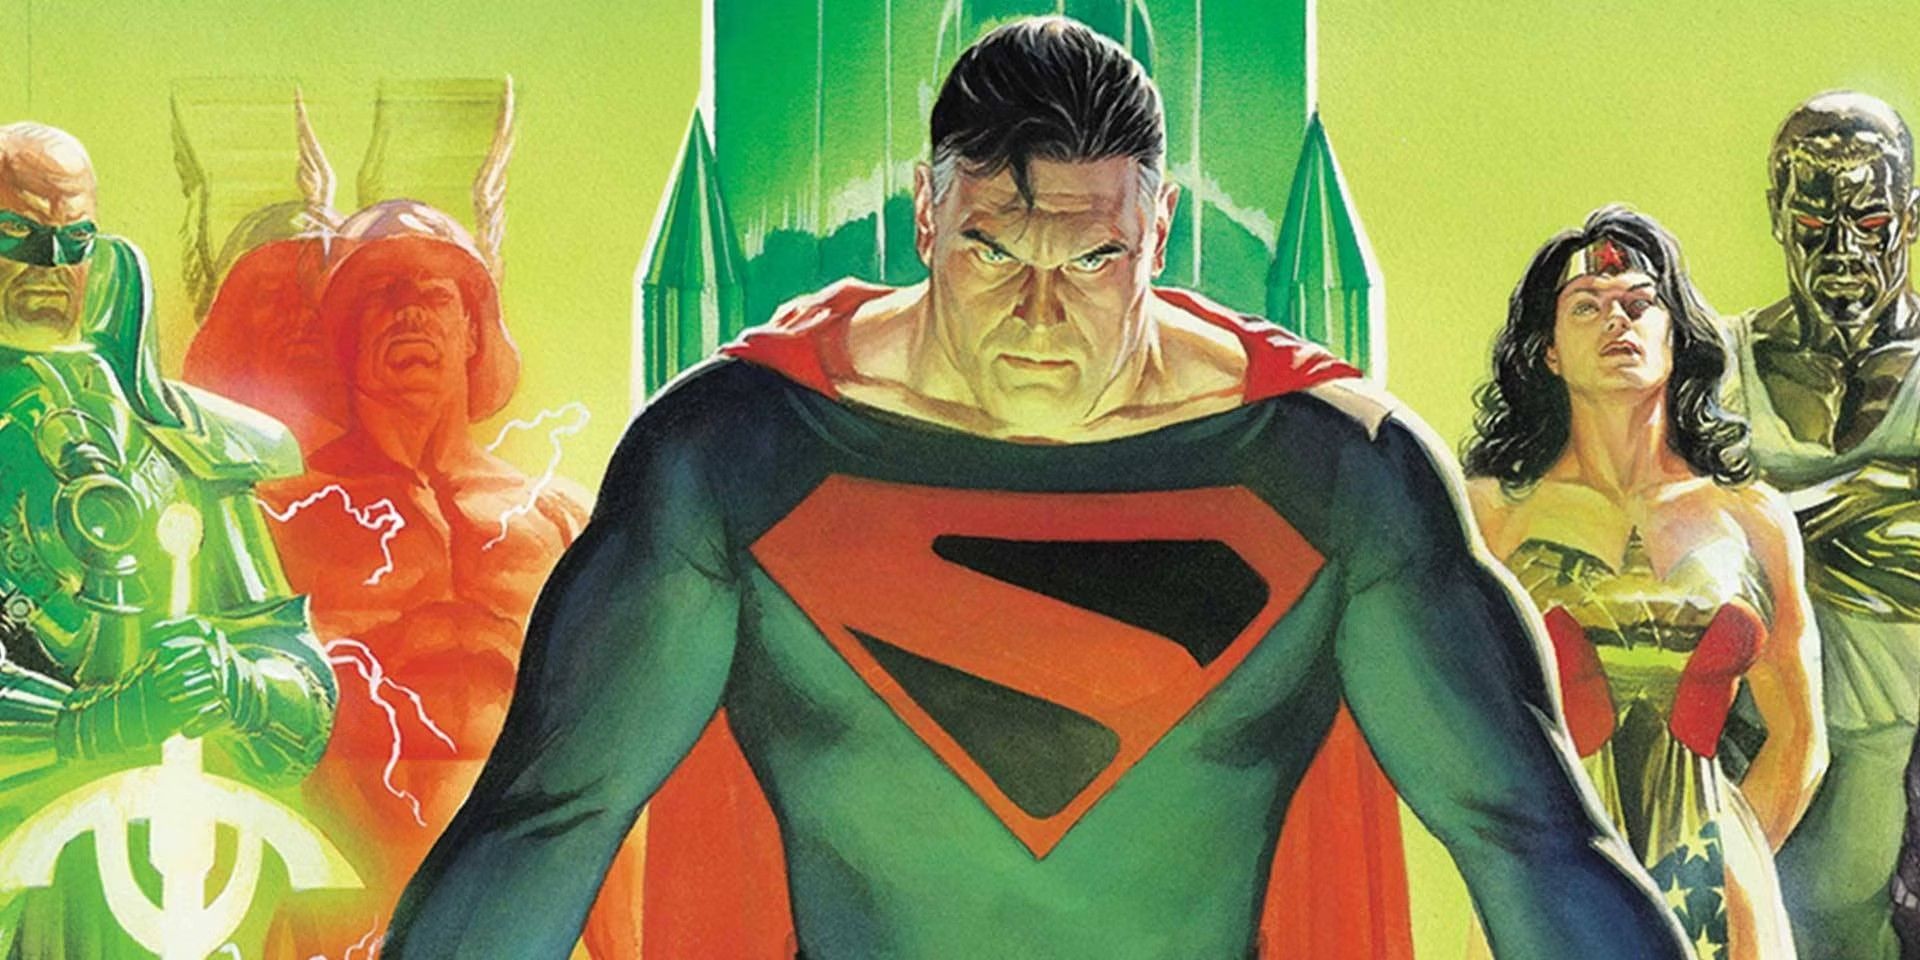 Superman looks angry in art from DC's Kingdom Come